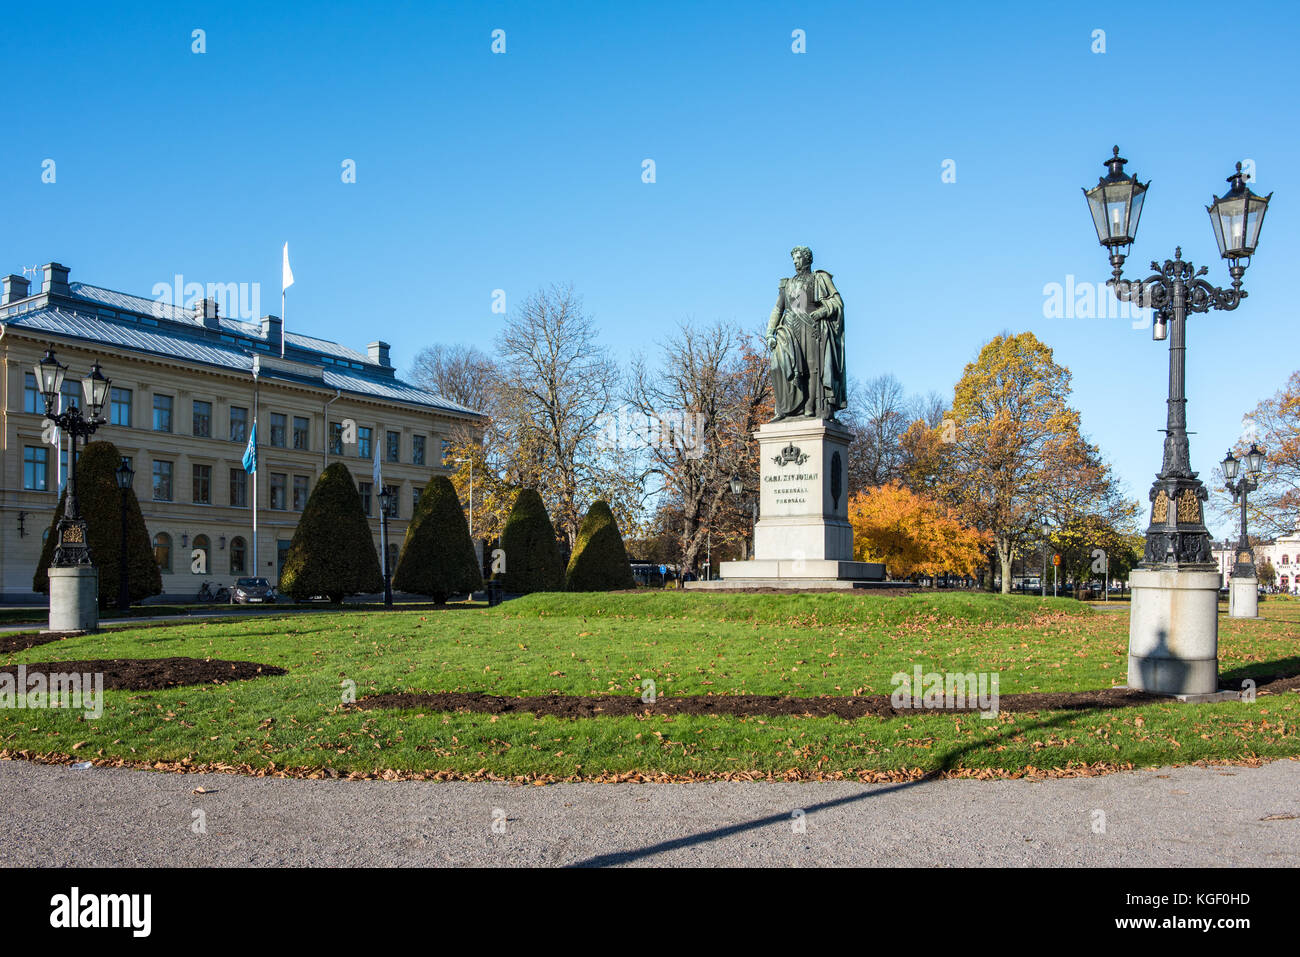 Karl Johan’s Park in Norrkoping. This is a historic park dedicated to Karl Johan XIV, the first Bernadotte king in Sweden. Stock Photo